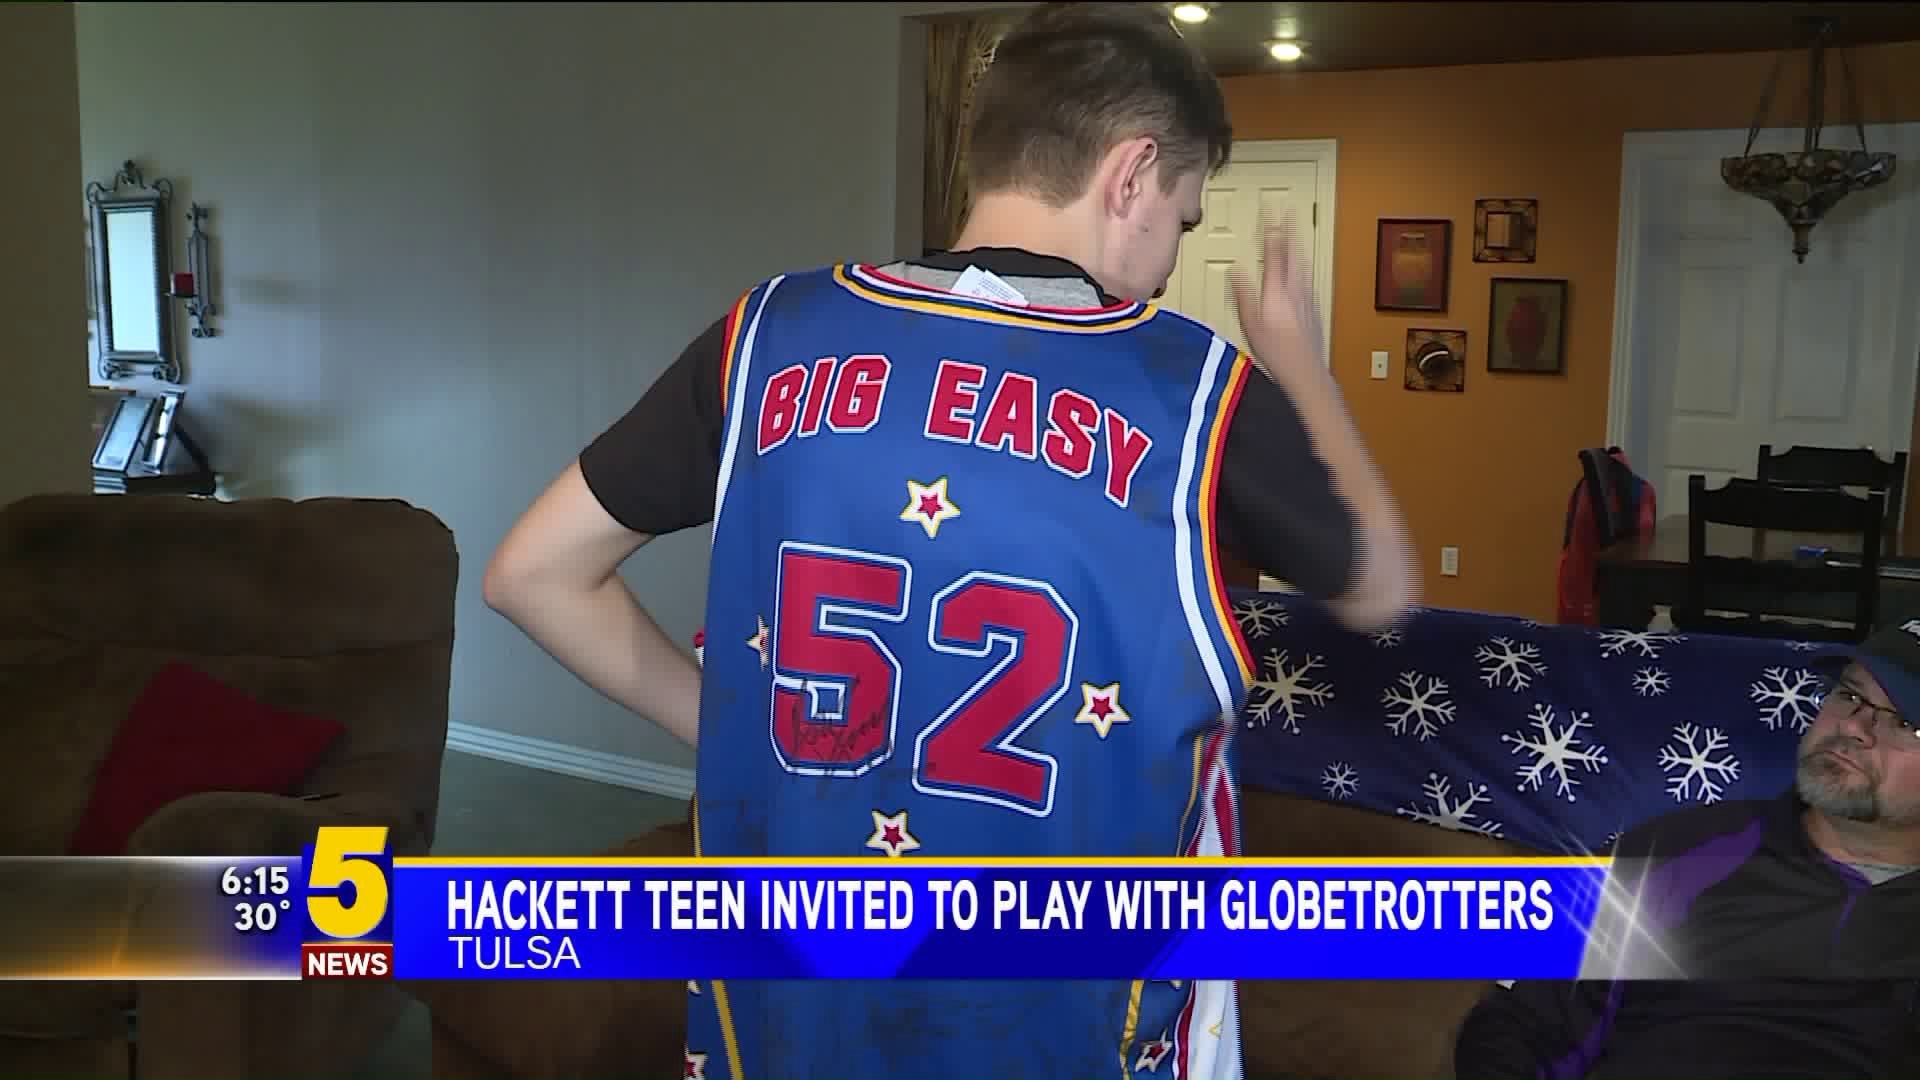 Hacket Teen Invited To Play With Globetrotters in Tulsa